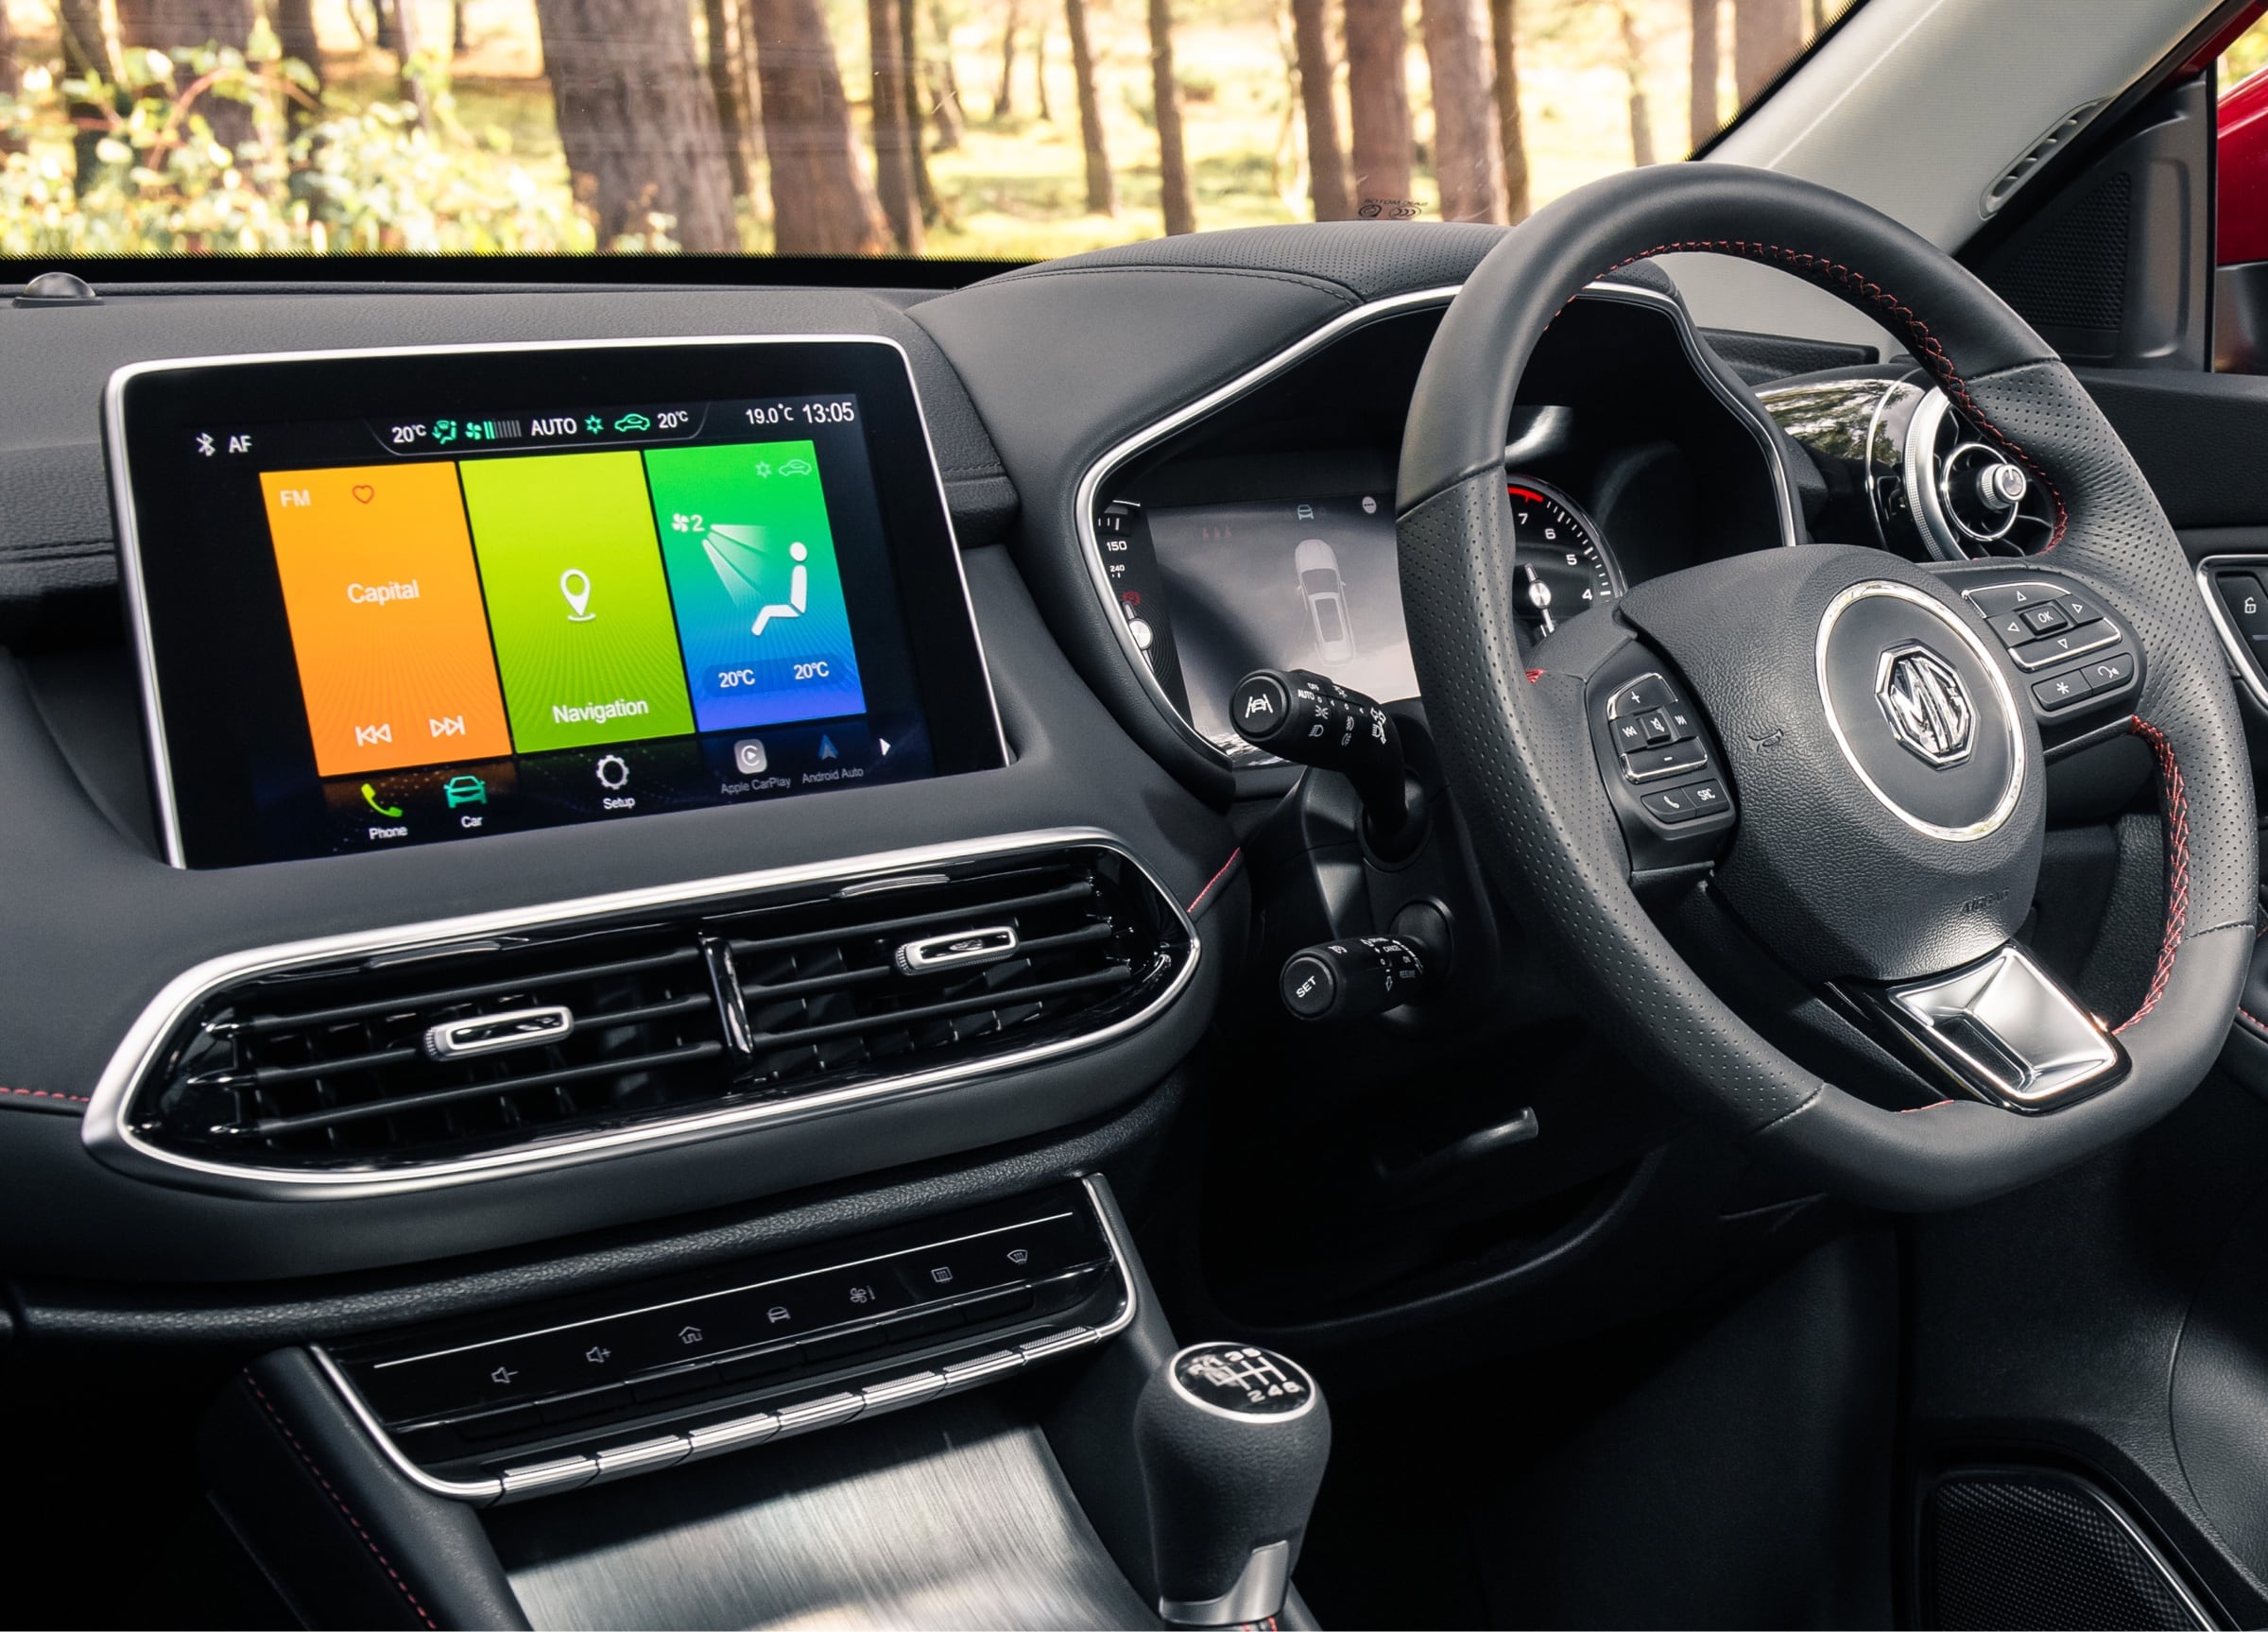 The MG HS 10-inch touchscreen